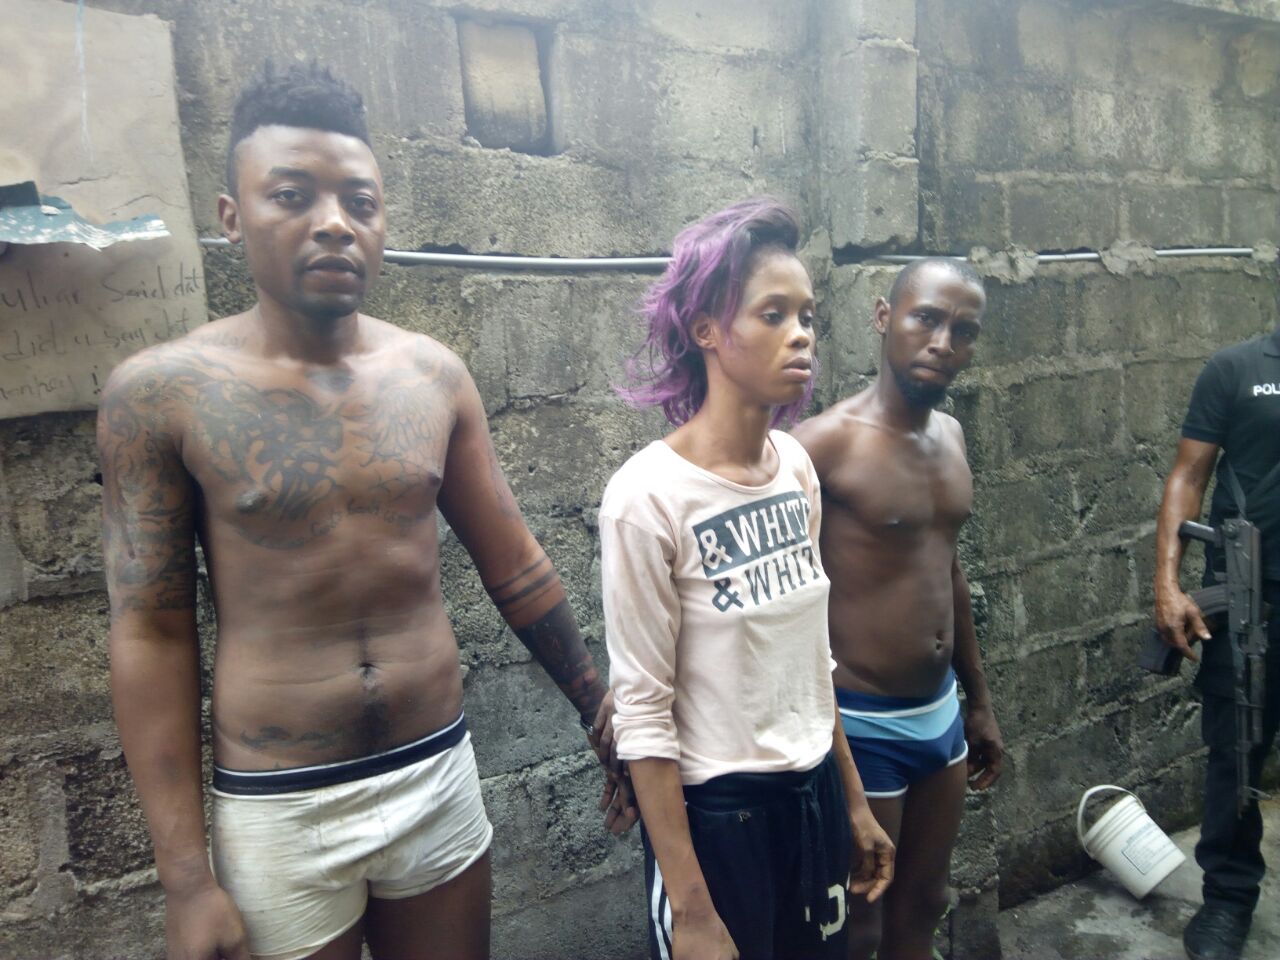 Suspects Who Murdered A JUMIA Delivery Man Over iPhone 7 In Port Harcourt 